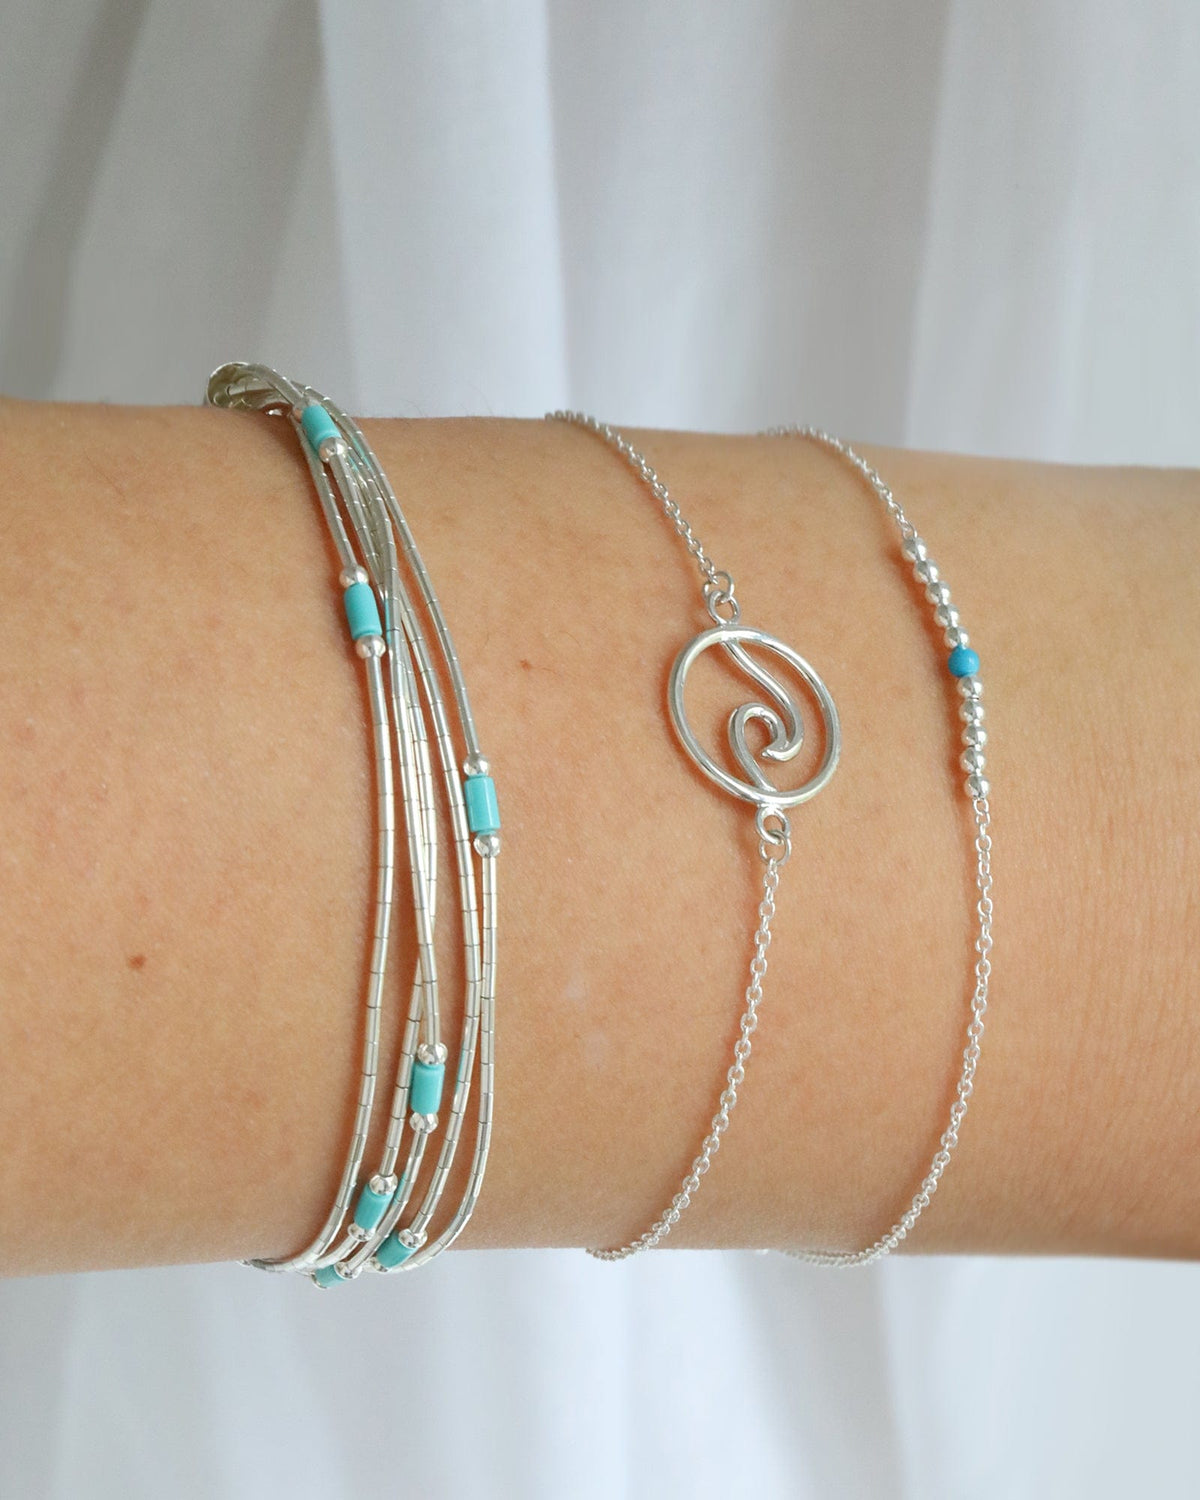 5 Strand Liquid Silver and Turquoise Bracelet